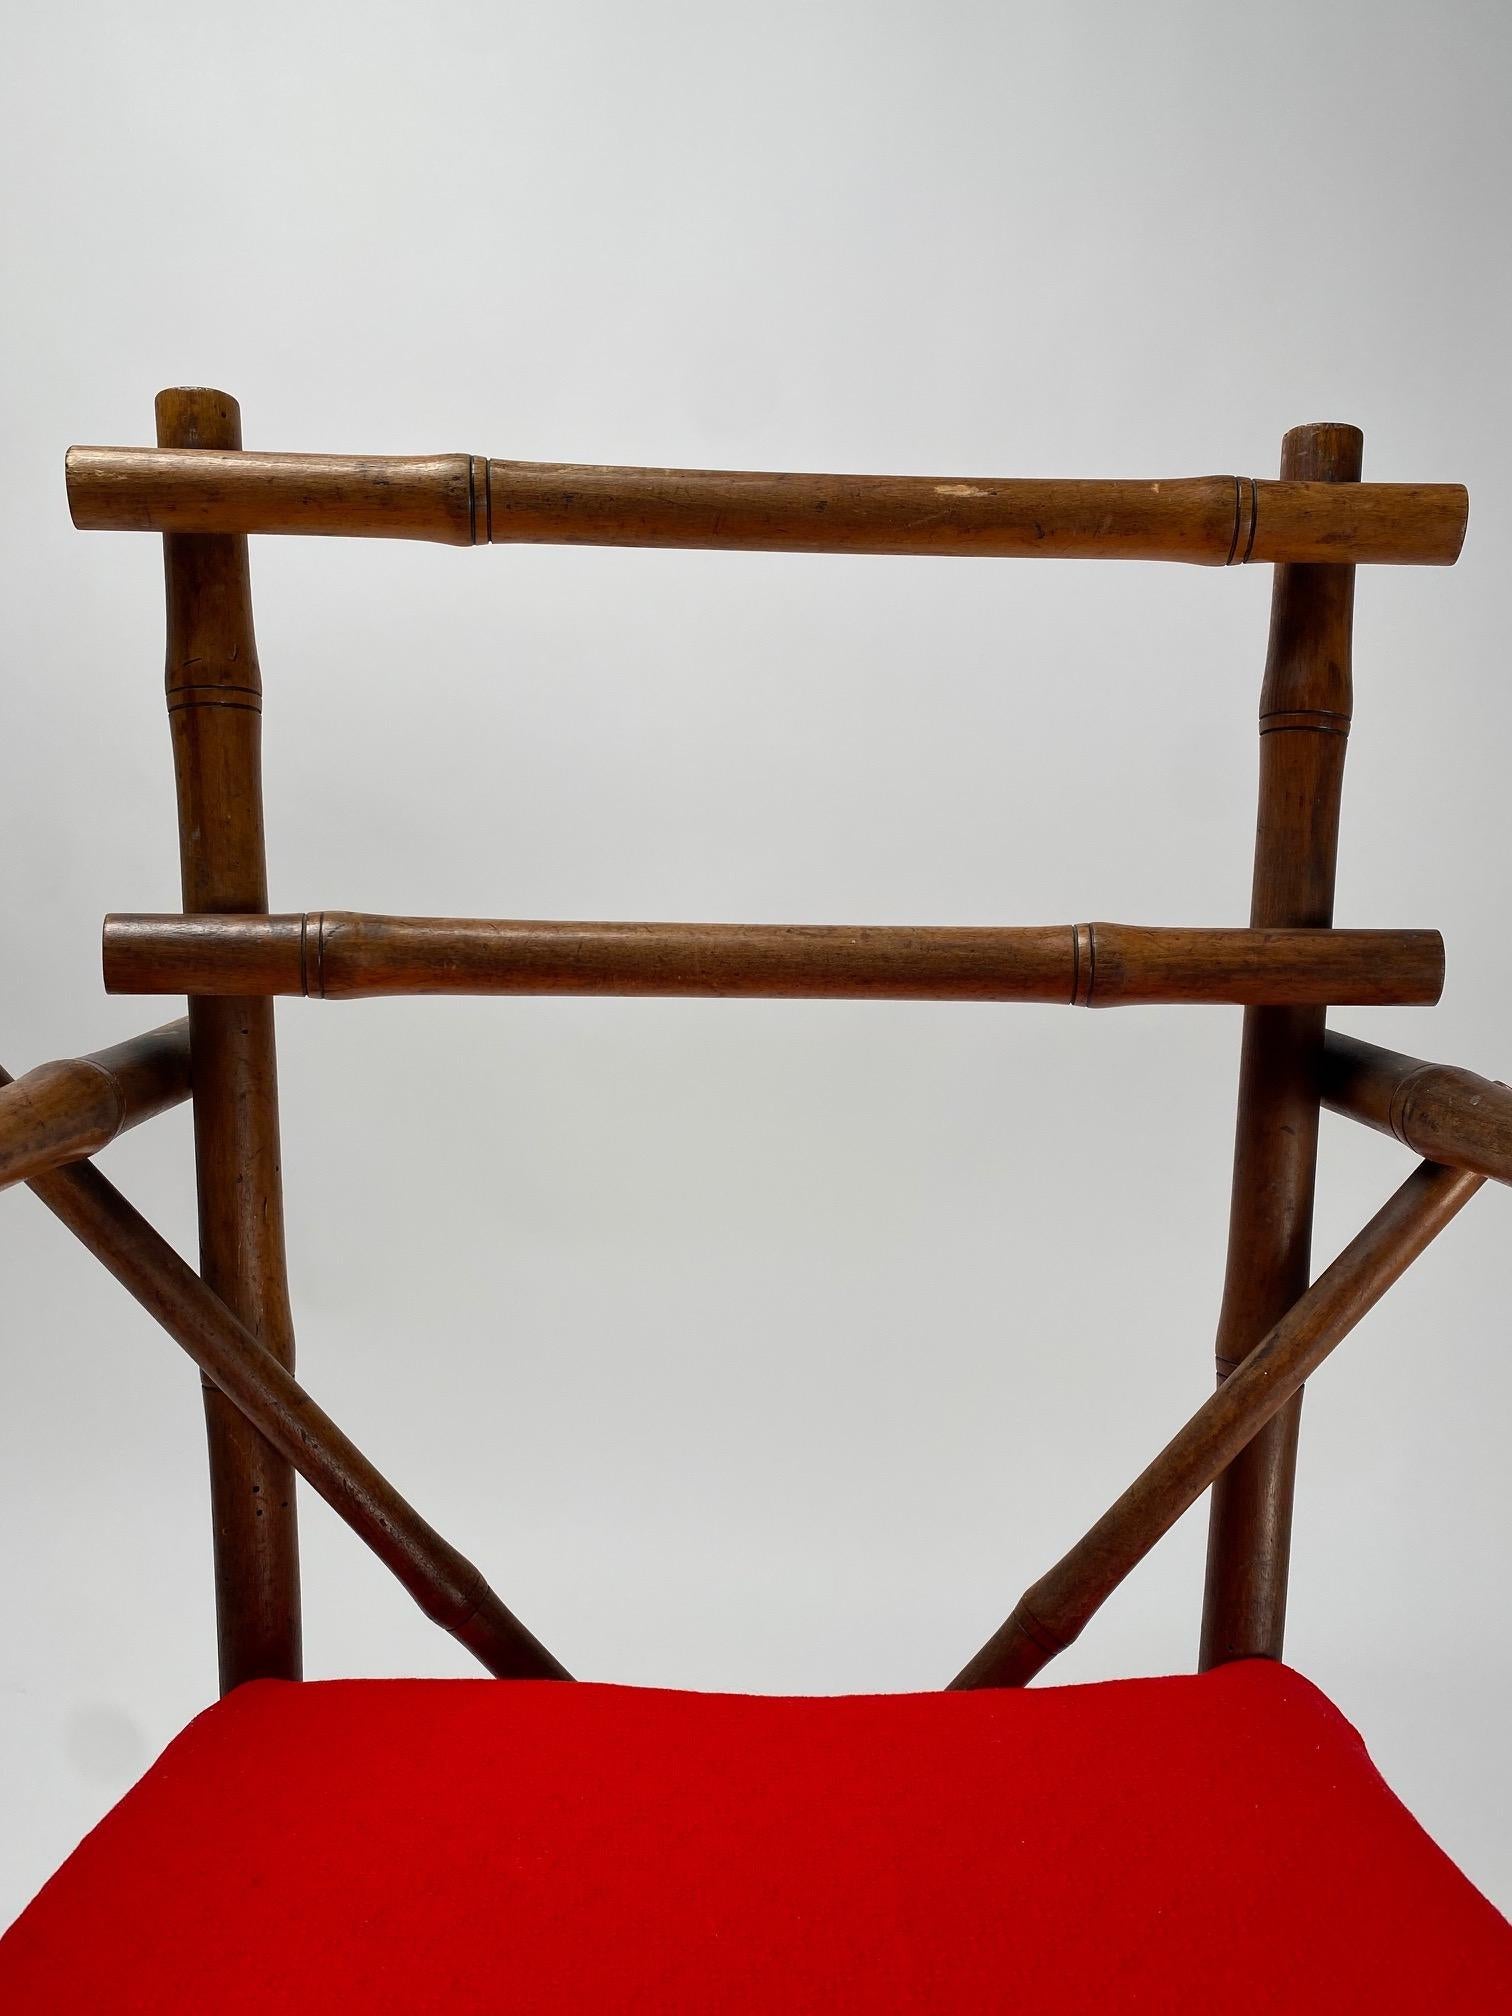 Metal Sculptural Bamboo Chair, Italy 1900s For Sale